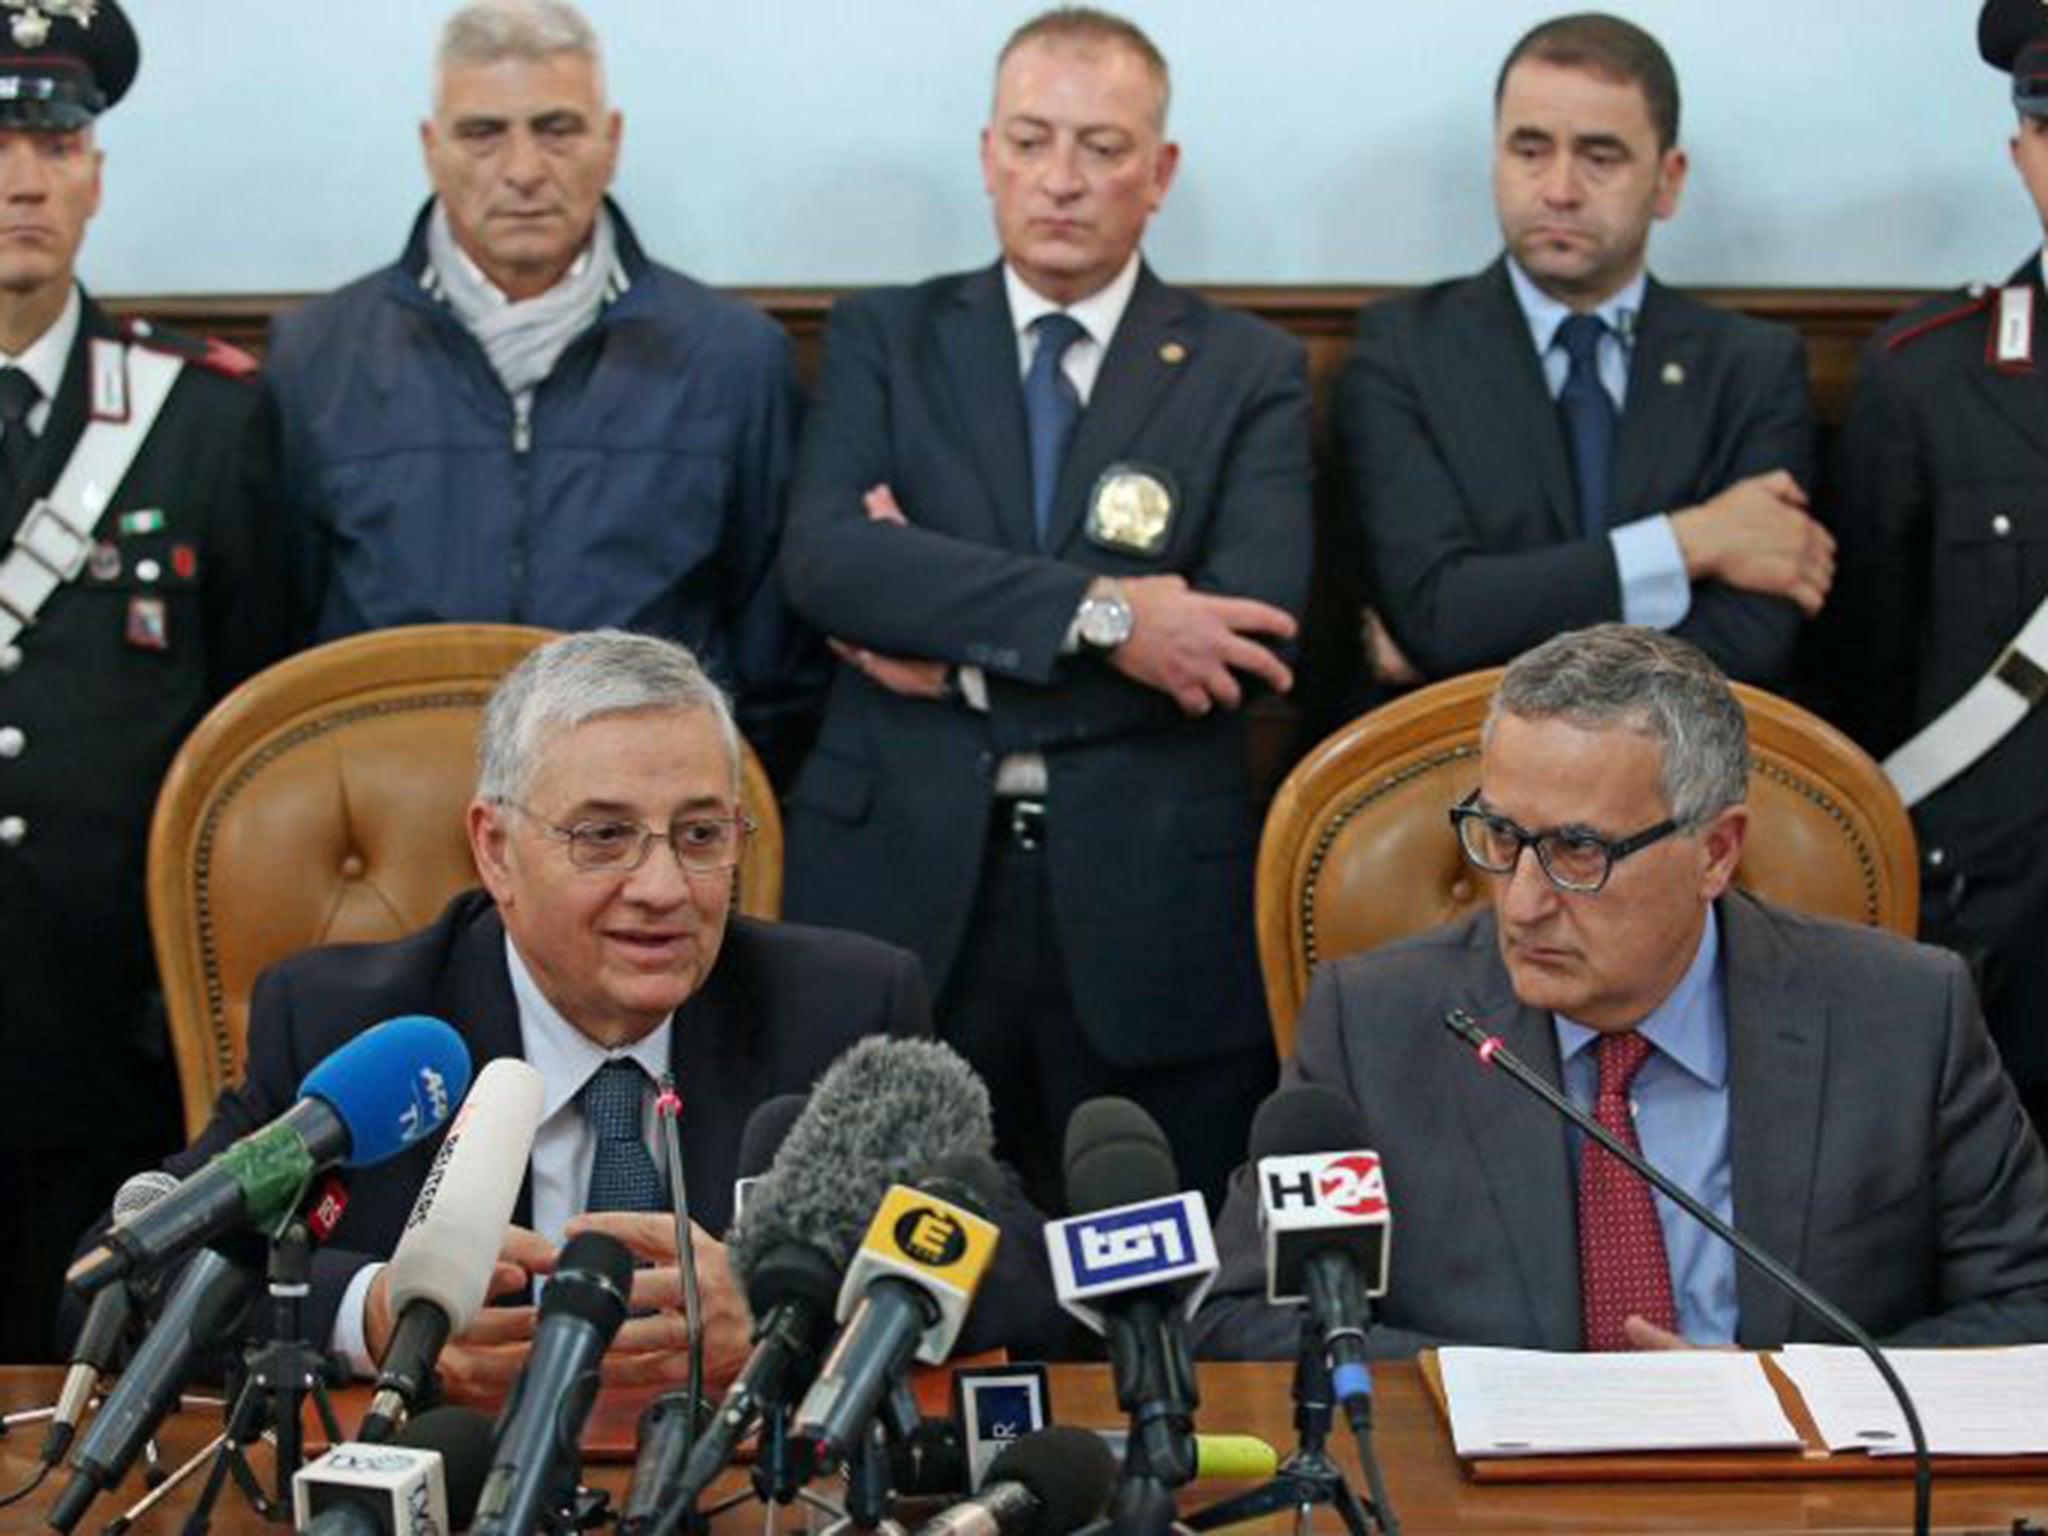 Public prosecutor of Rome, Giuseppe Pignatone (L) after the anti-terrorism operation in which 17 arrest warrants for Iraqi Kurds on terrorism related charges